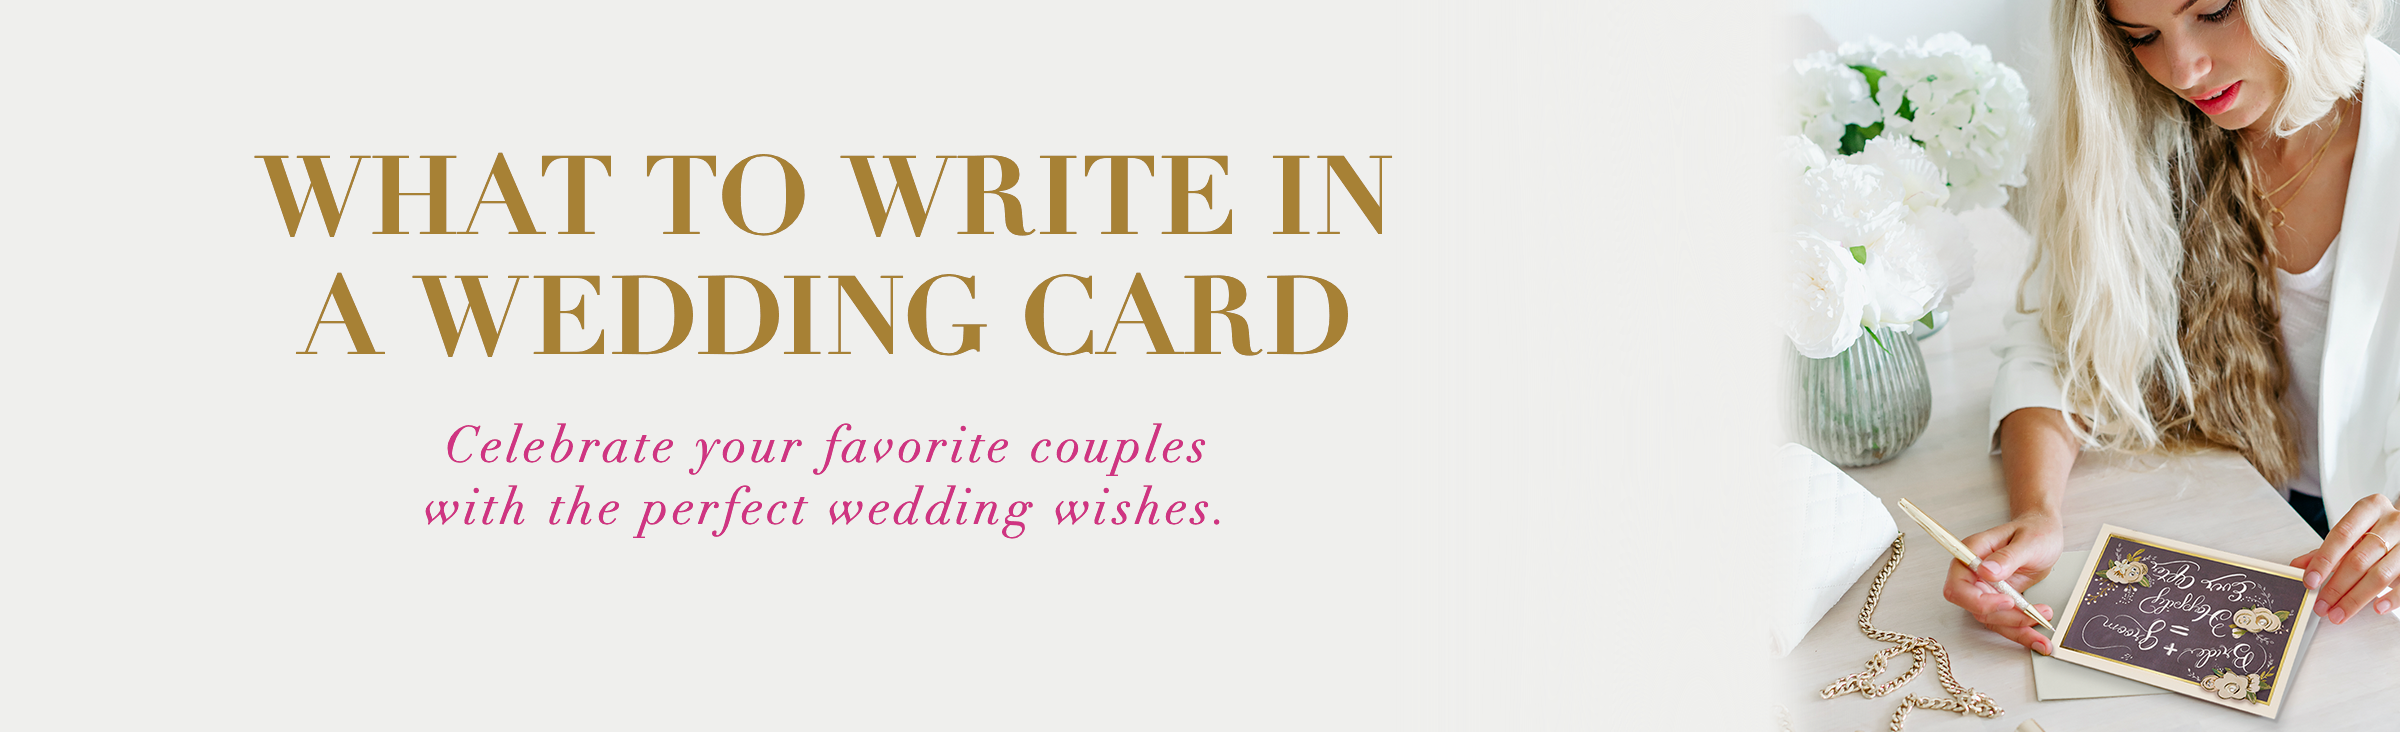 What to write in a wedding card Celebrate your favorite couples with the perfect wedding wishes